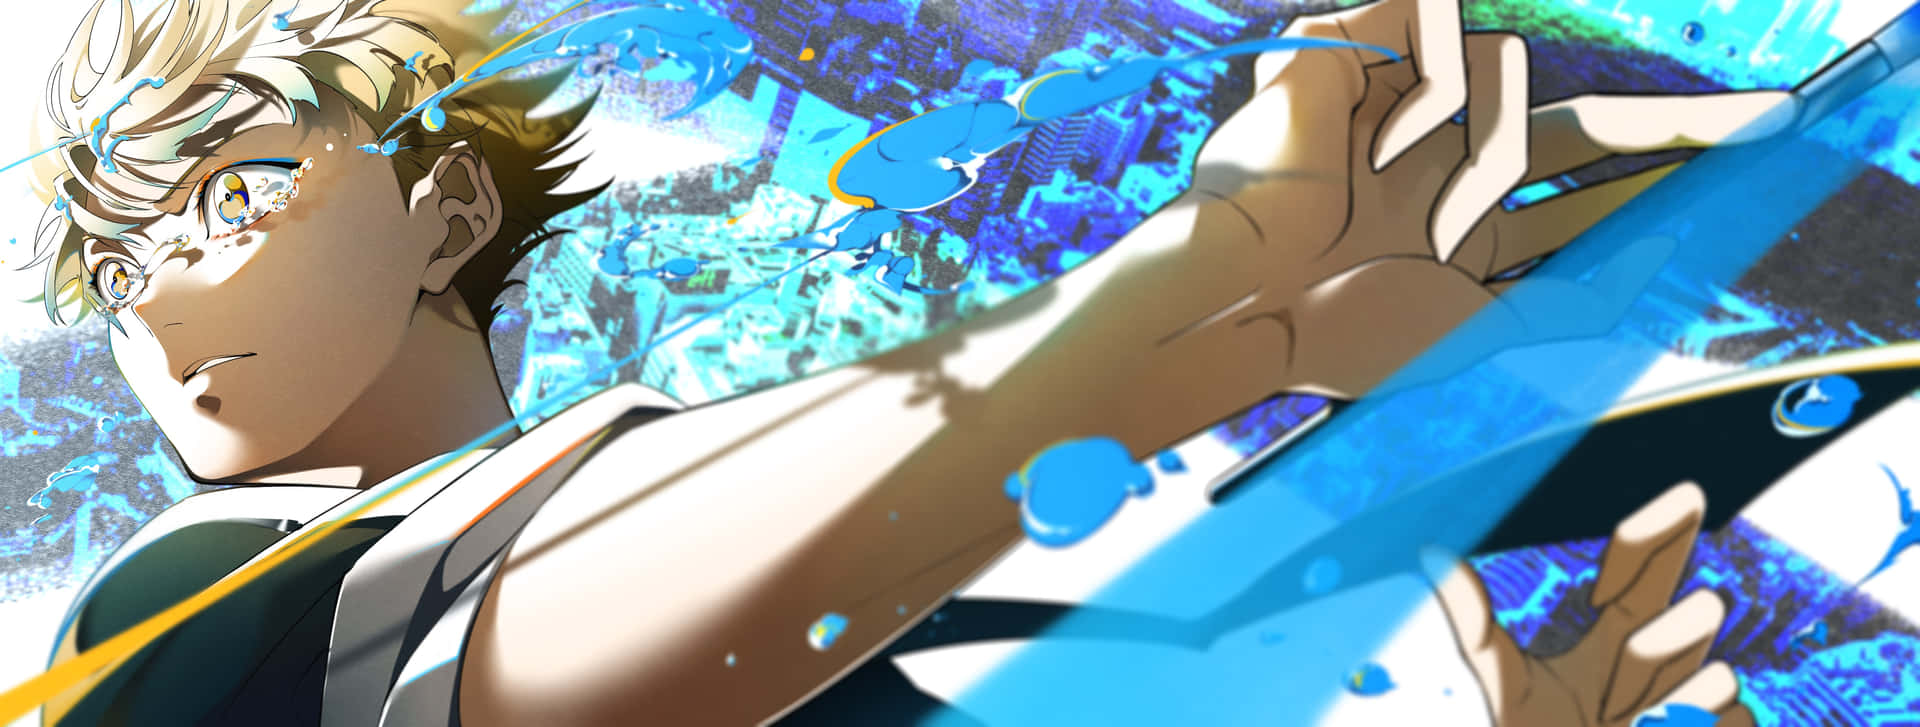 Cool Anime Character Blue Background Sword Wallpaper